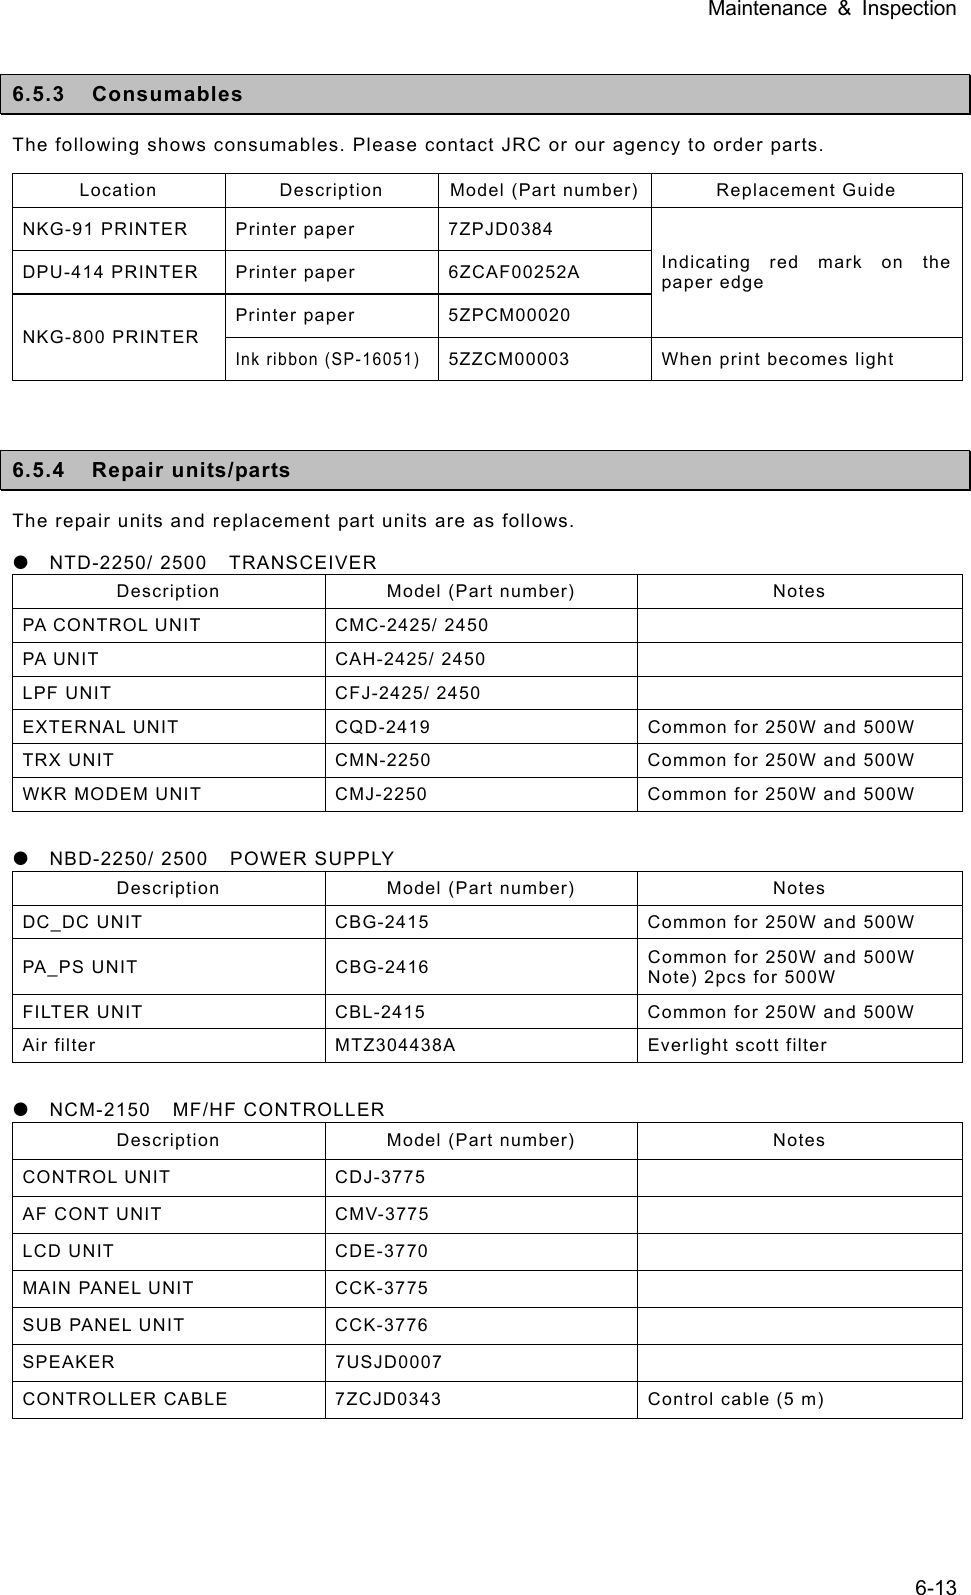 Maintenance &amp; Inspection 6-13  6.5.3 Consumables The following shows consumables. Please contact JRC or our agency to order parts.   Location  Description  Model (Part number) Replacement Guide NKG-91 PRINTER  Printer paper  7ZPJD0384 Indicating red mark on the paper edge DPU-414 PRINTER  Printer paper  6ZCAF00252A NKG-800 PRINTER Printer paper  5ZPCM00020 Ink ribbon (SP-16051)5ZZCM00003  When print becomes light   6.5.4 Repair units/parts The repair units and replacement part units are as follows.   z  NTD-2250/ 2500  TRANSCEIVER Description  Model (Part number)  Notes PA CONTROL UNIT  CMC-2425/ 2450   PA UNIT  CAH-2425/ 2450   LPF UNIT  CFJ-2425/ 2450   EXTERNAL UNIT  CQD-2419  Common for 250W and 500W TRX UNIT  CMN-2250  Common for 250W and 500W WKR MODEM UNIT  CMJ-2250  Common for 250W and 500W  z  NBD-2250/ 2500  POWER SUPPLY Description  Model (Part number)  Notes DC_DC UNIT  CBG-2415  Common for 250W and 500W PA_PS UNIT  CBG-2416  Common for 250W and 500W Note) 2pcs for 500W FILTER UNIT  CBL-2415  Common for 250W and 500W Air filter  MTZ304438A  Everlight scott filter  z  NCM-2150  MF/HF CONTROLLER Description  Model (Part number)  Notes CONTROL UNIT  CDJ-3775   AF CONT UNIT  CMV-3775   LCD UNIT  CDE-3770   MAIN PANEL UNIT  CCK-3775   SUB PANEL UNIT  CCK-3776   SPEAKER 7USJD0007  CONTROLLER CABLE  7ZCJD0343  Control cable (5 m)   